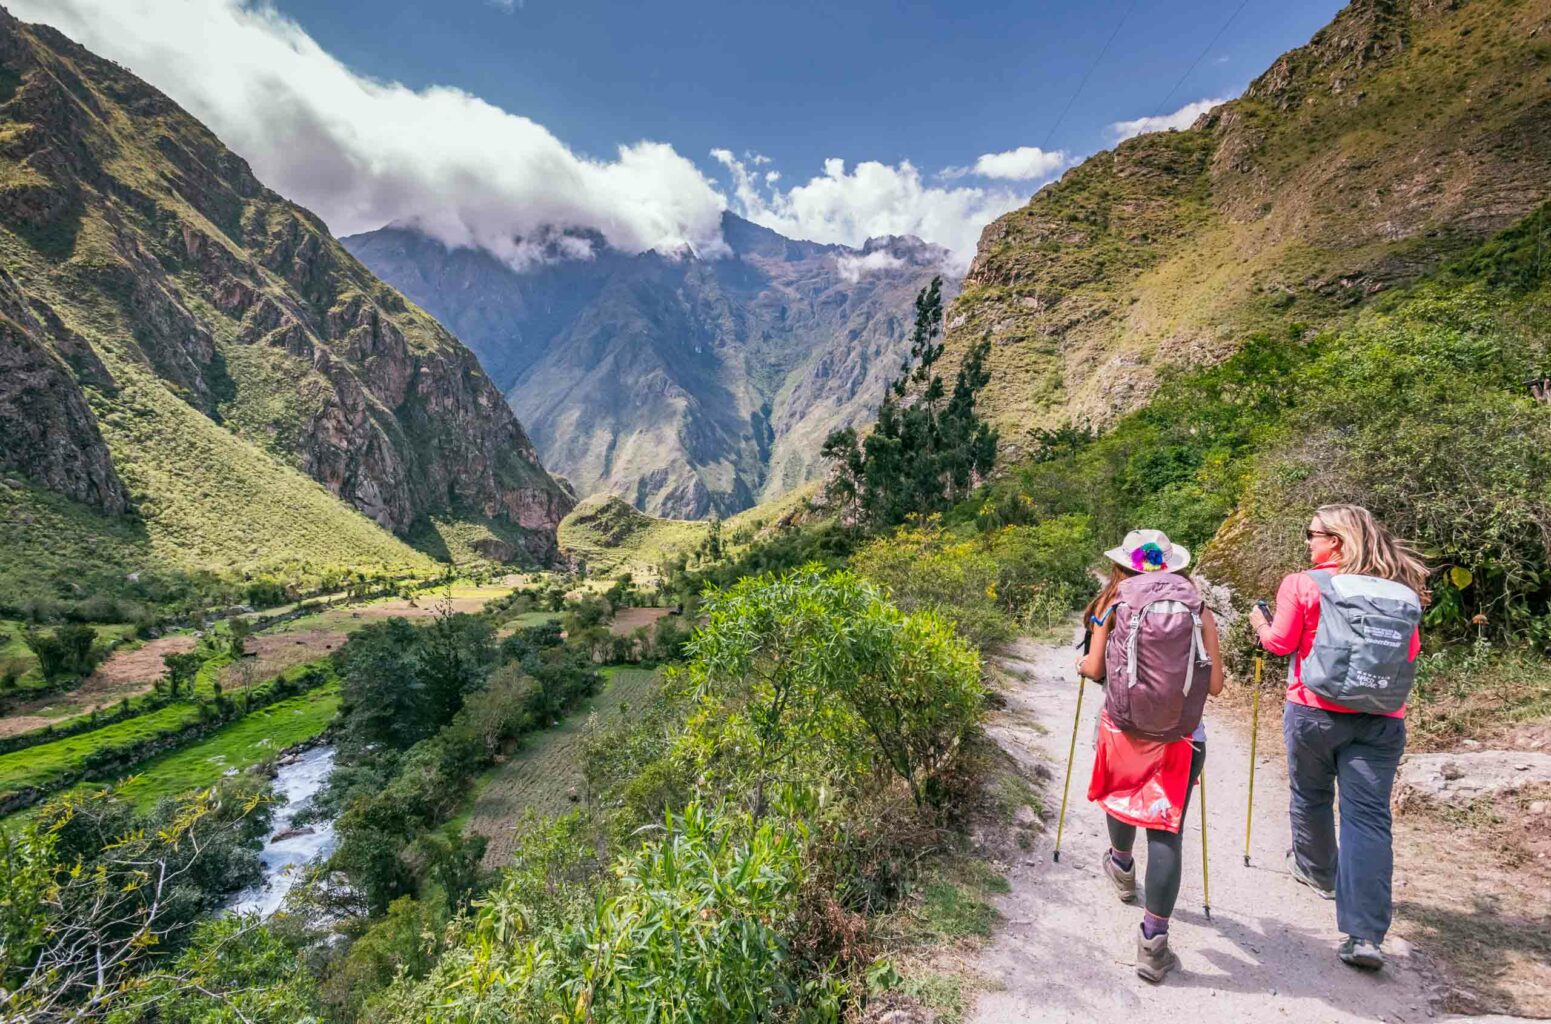 Two women hiking through a valley surrounded by mountains on Peru's Inca Trail to Machu Picchu.